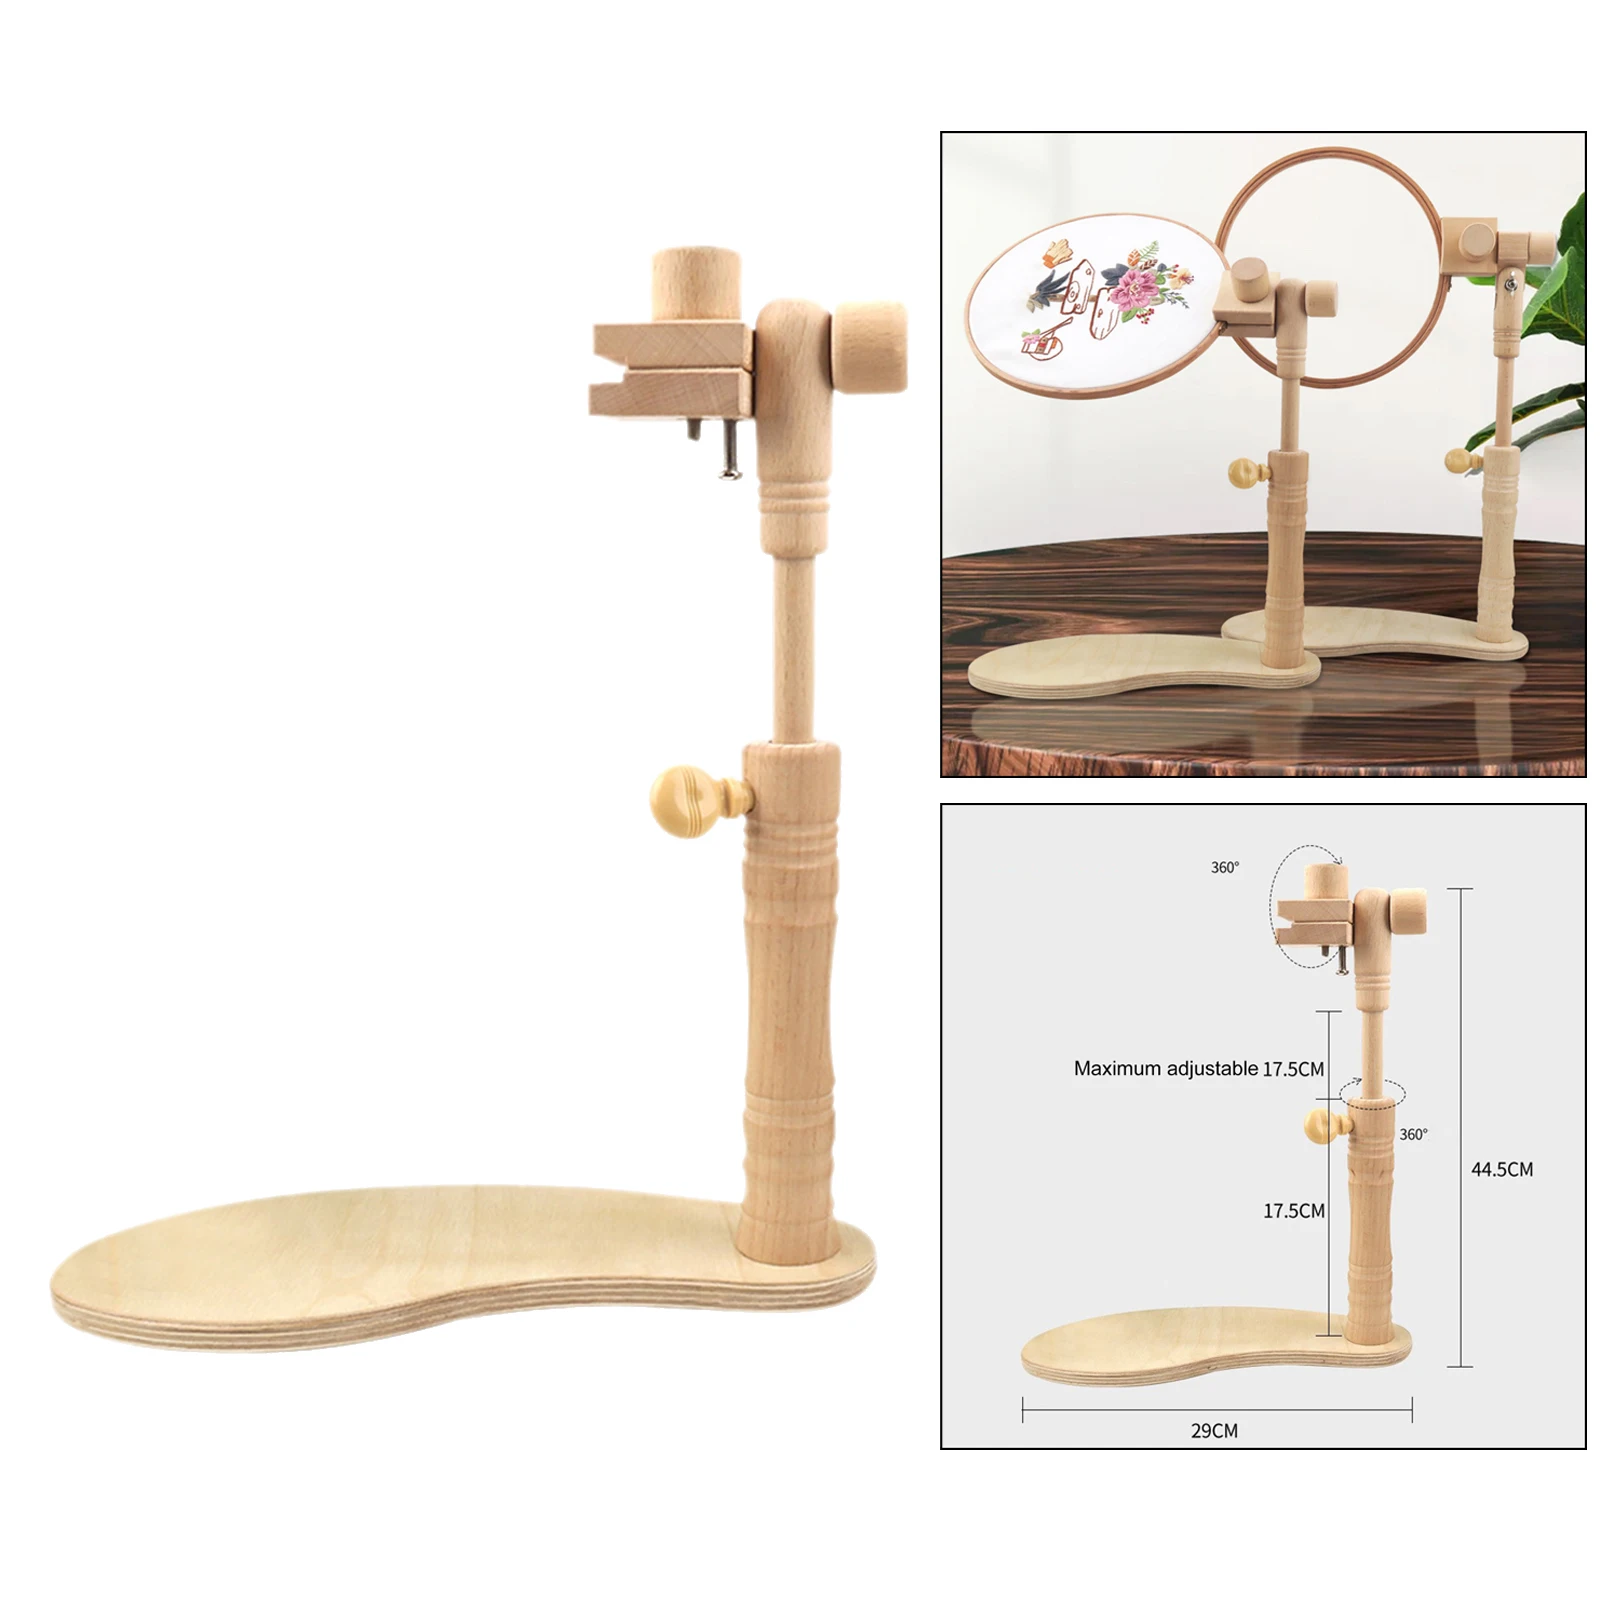 Adjustable Wooden Embroidery Lap Stand Tapestry Frame Cross Stitch Rack Holder Tabletop DIY Sewing Hoop Tools